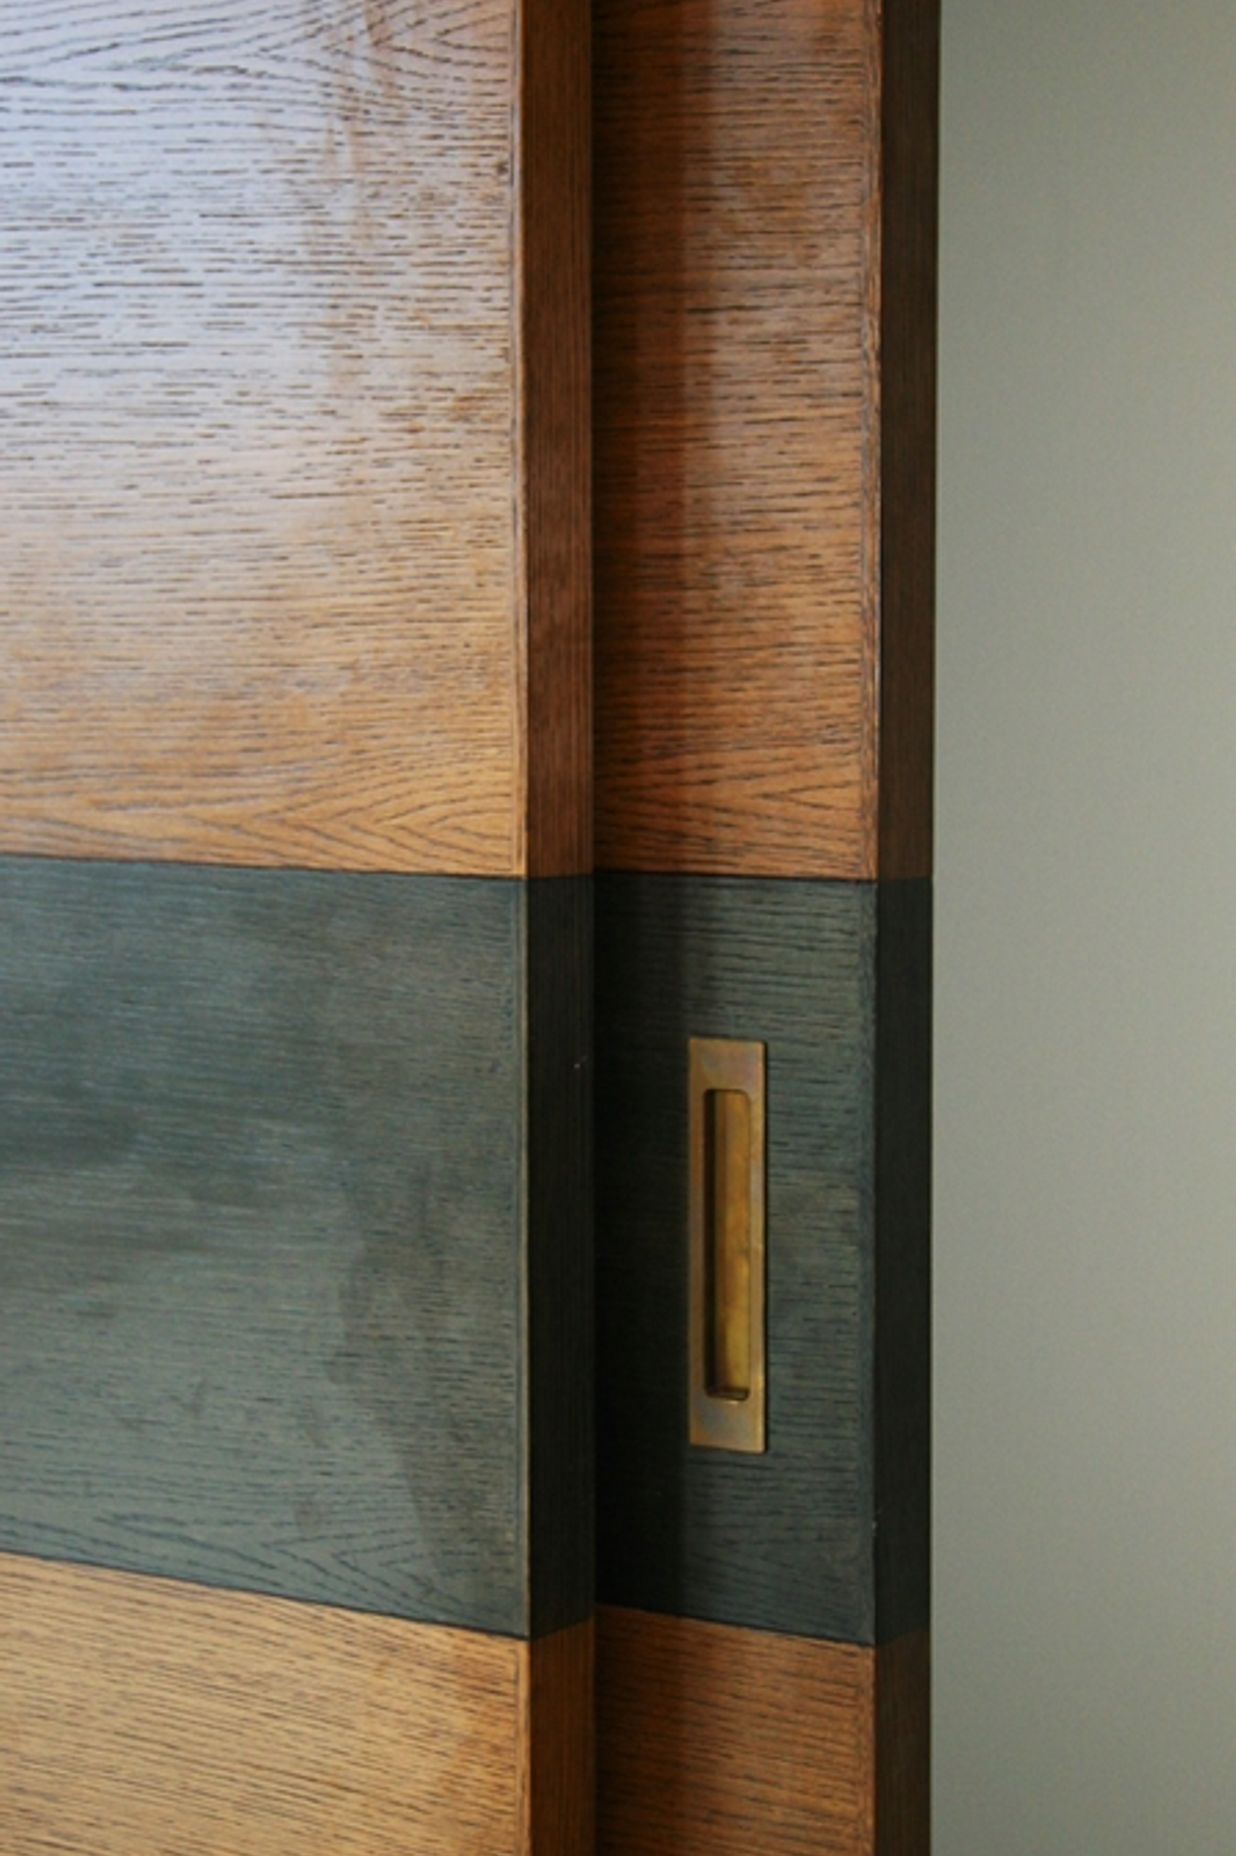 How do you ensure your handles suit the wider home design?